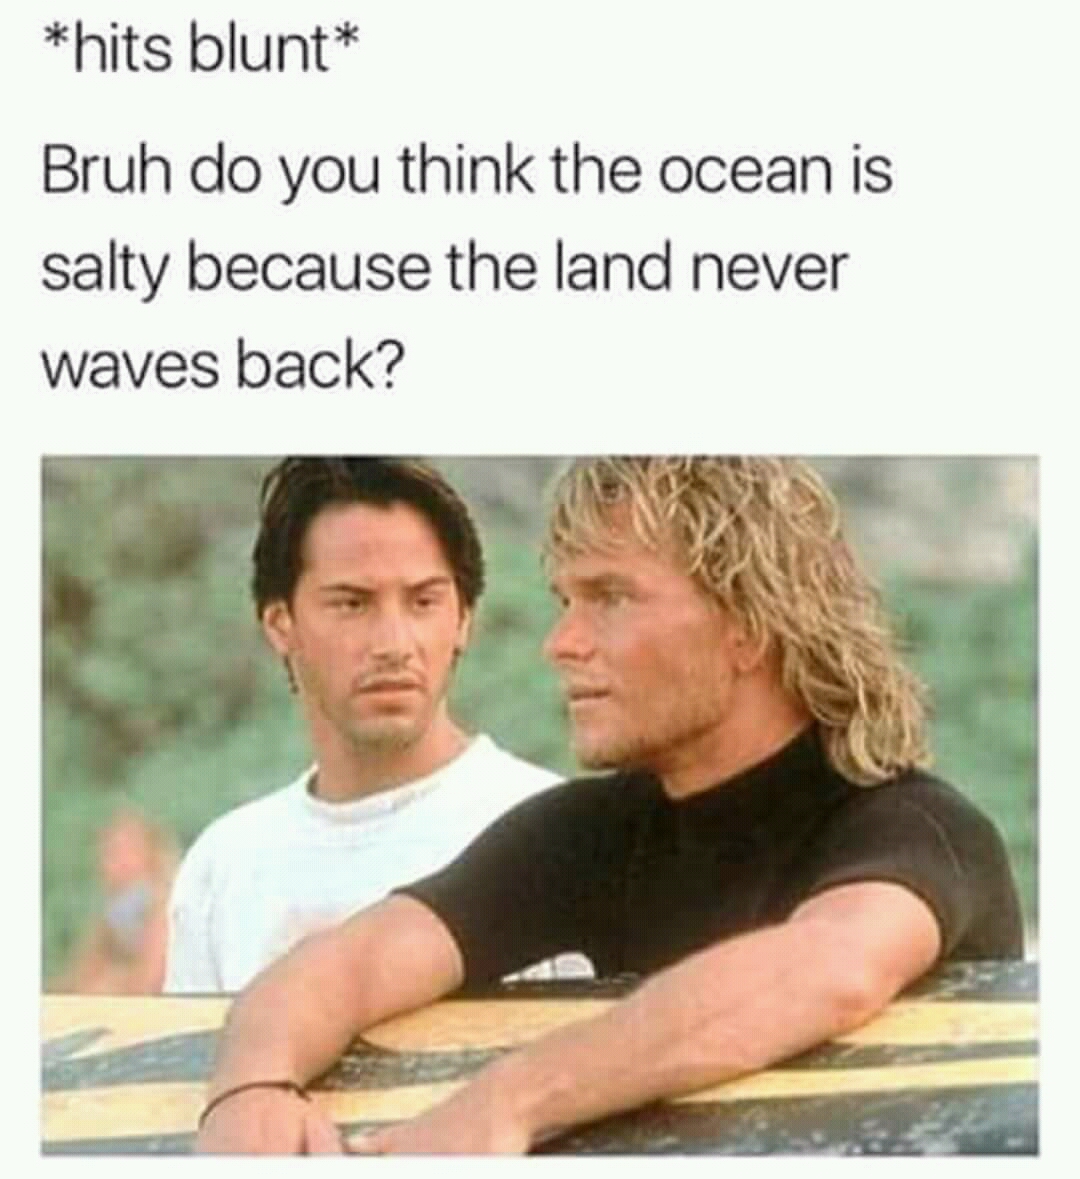 funny savage memes - hits blunt Bruh do you think the ocean is salty because the land never waves back?